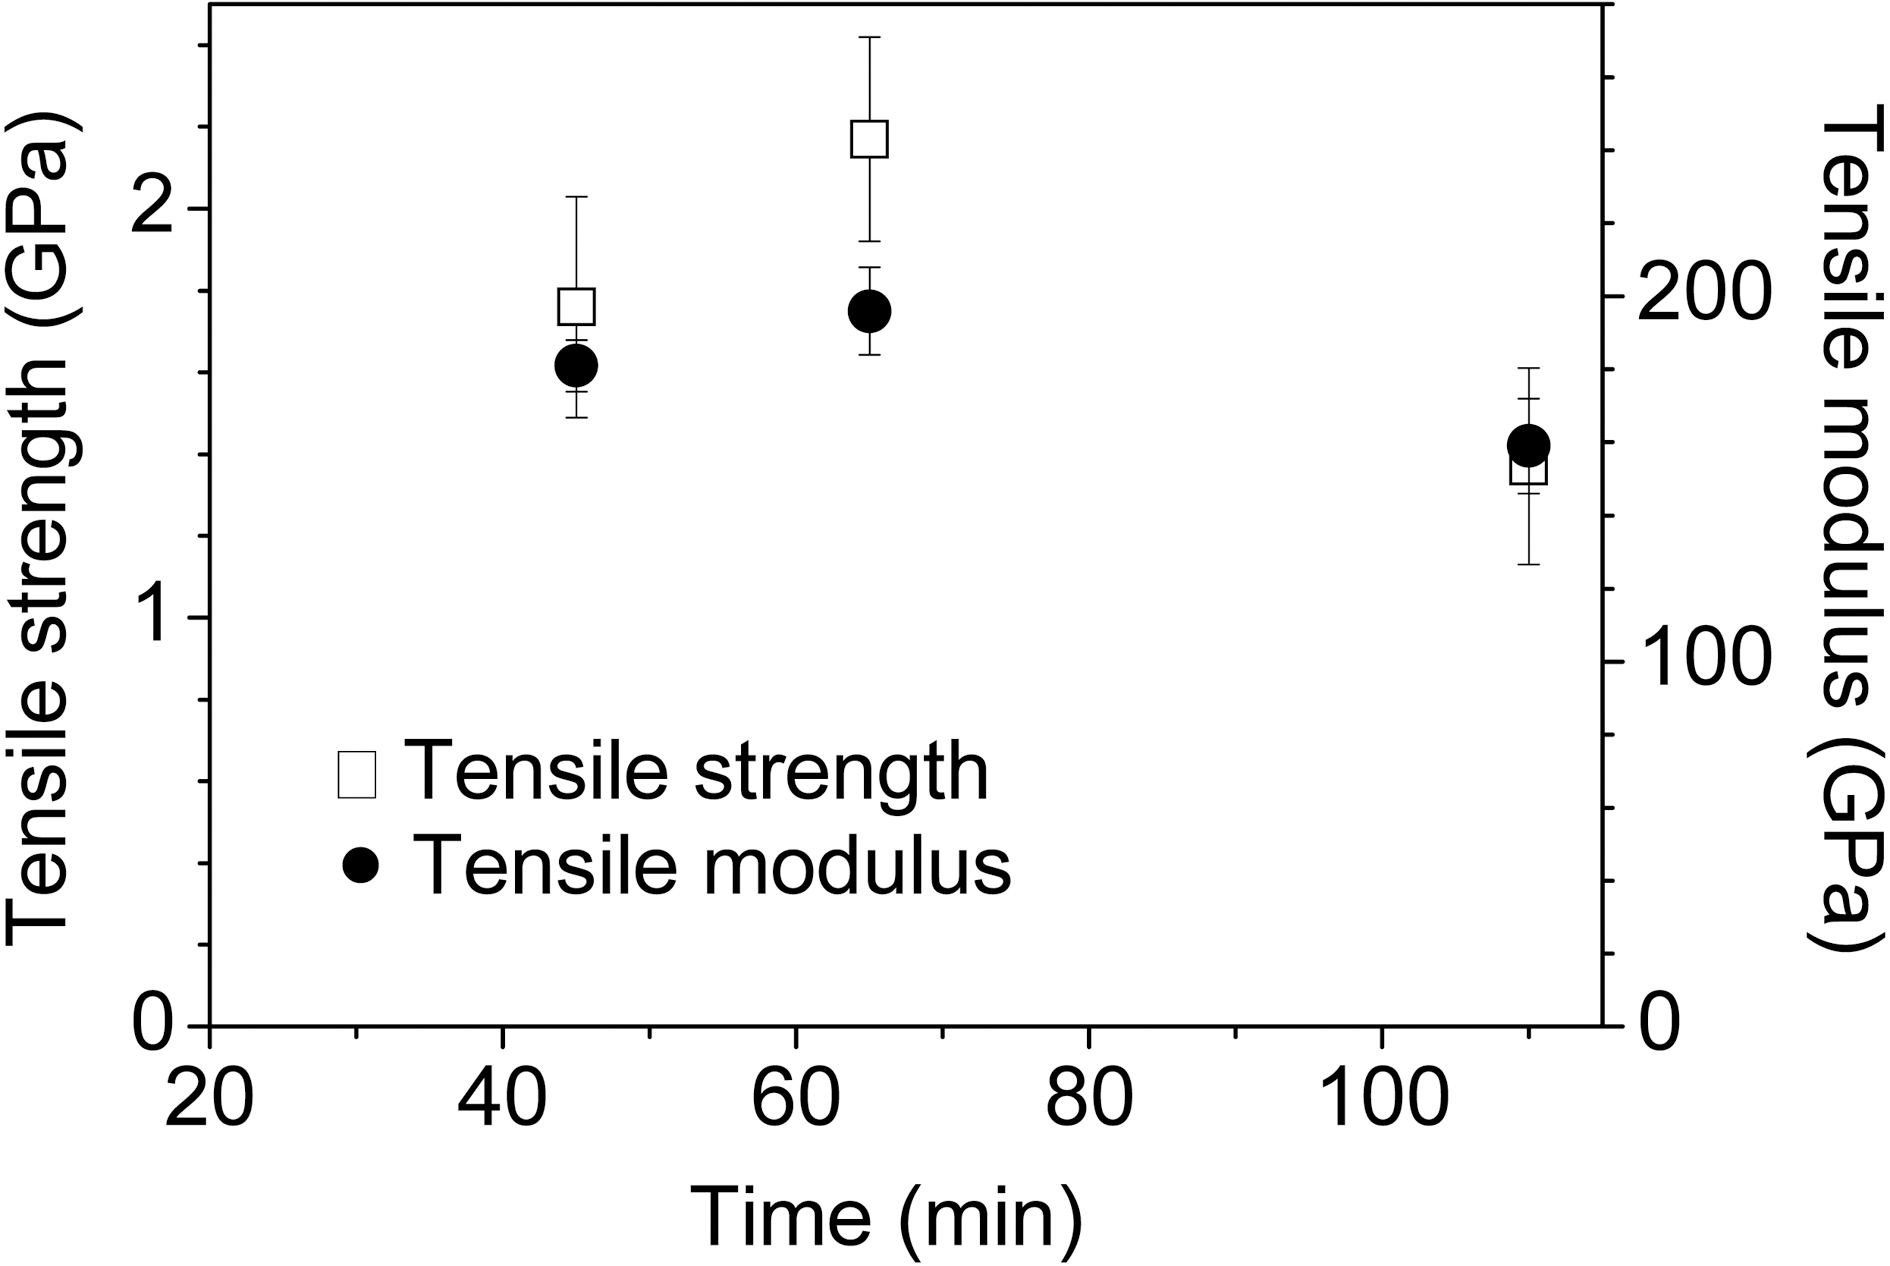 Tensile properties of carbon fibers as a function of a totalstabilization time at 208-275oC.